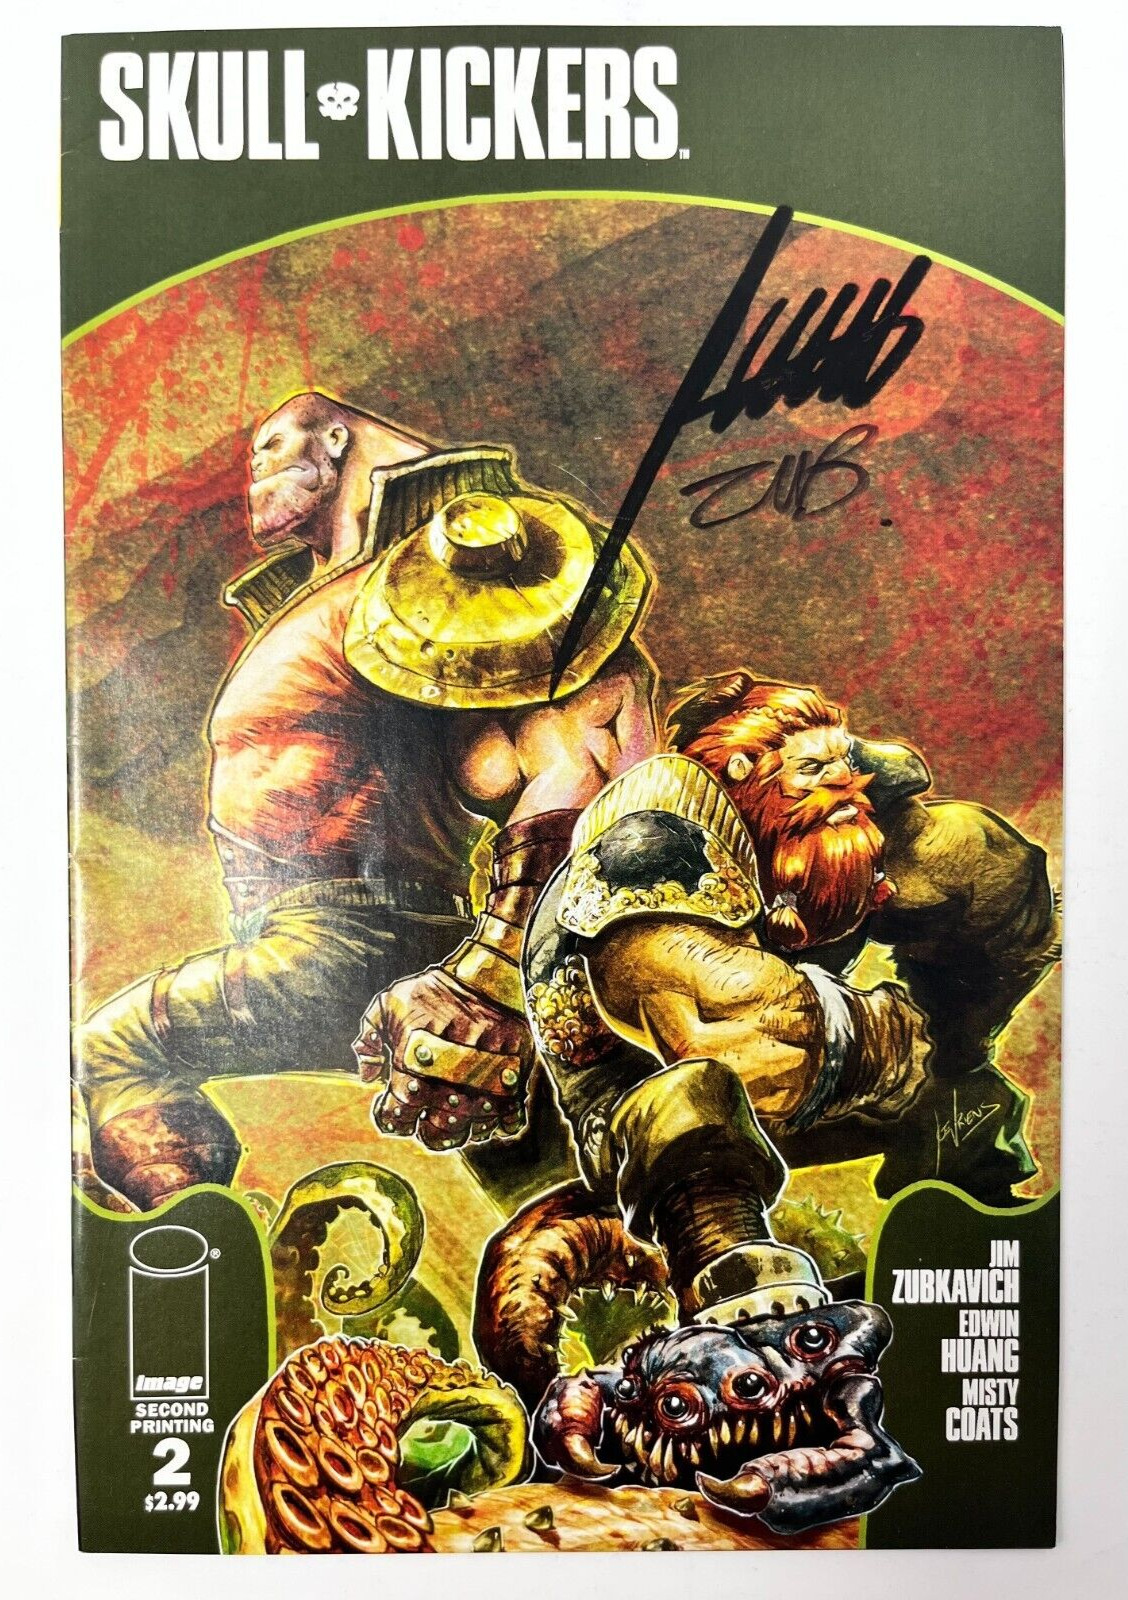 Skullkickers #2 Image 2010 Second Print Signed Edwin Huang